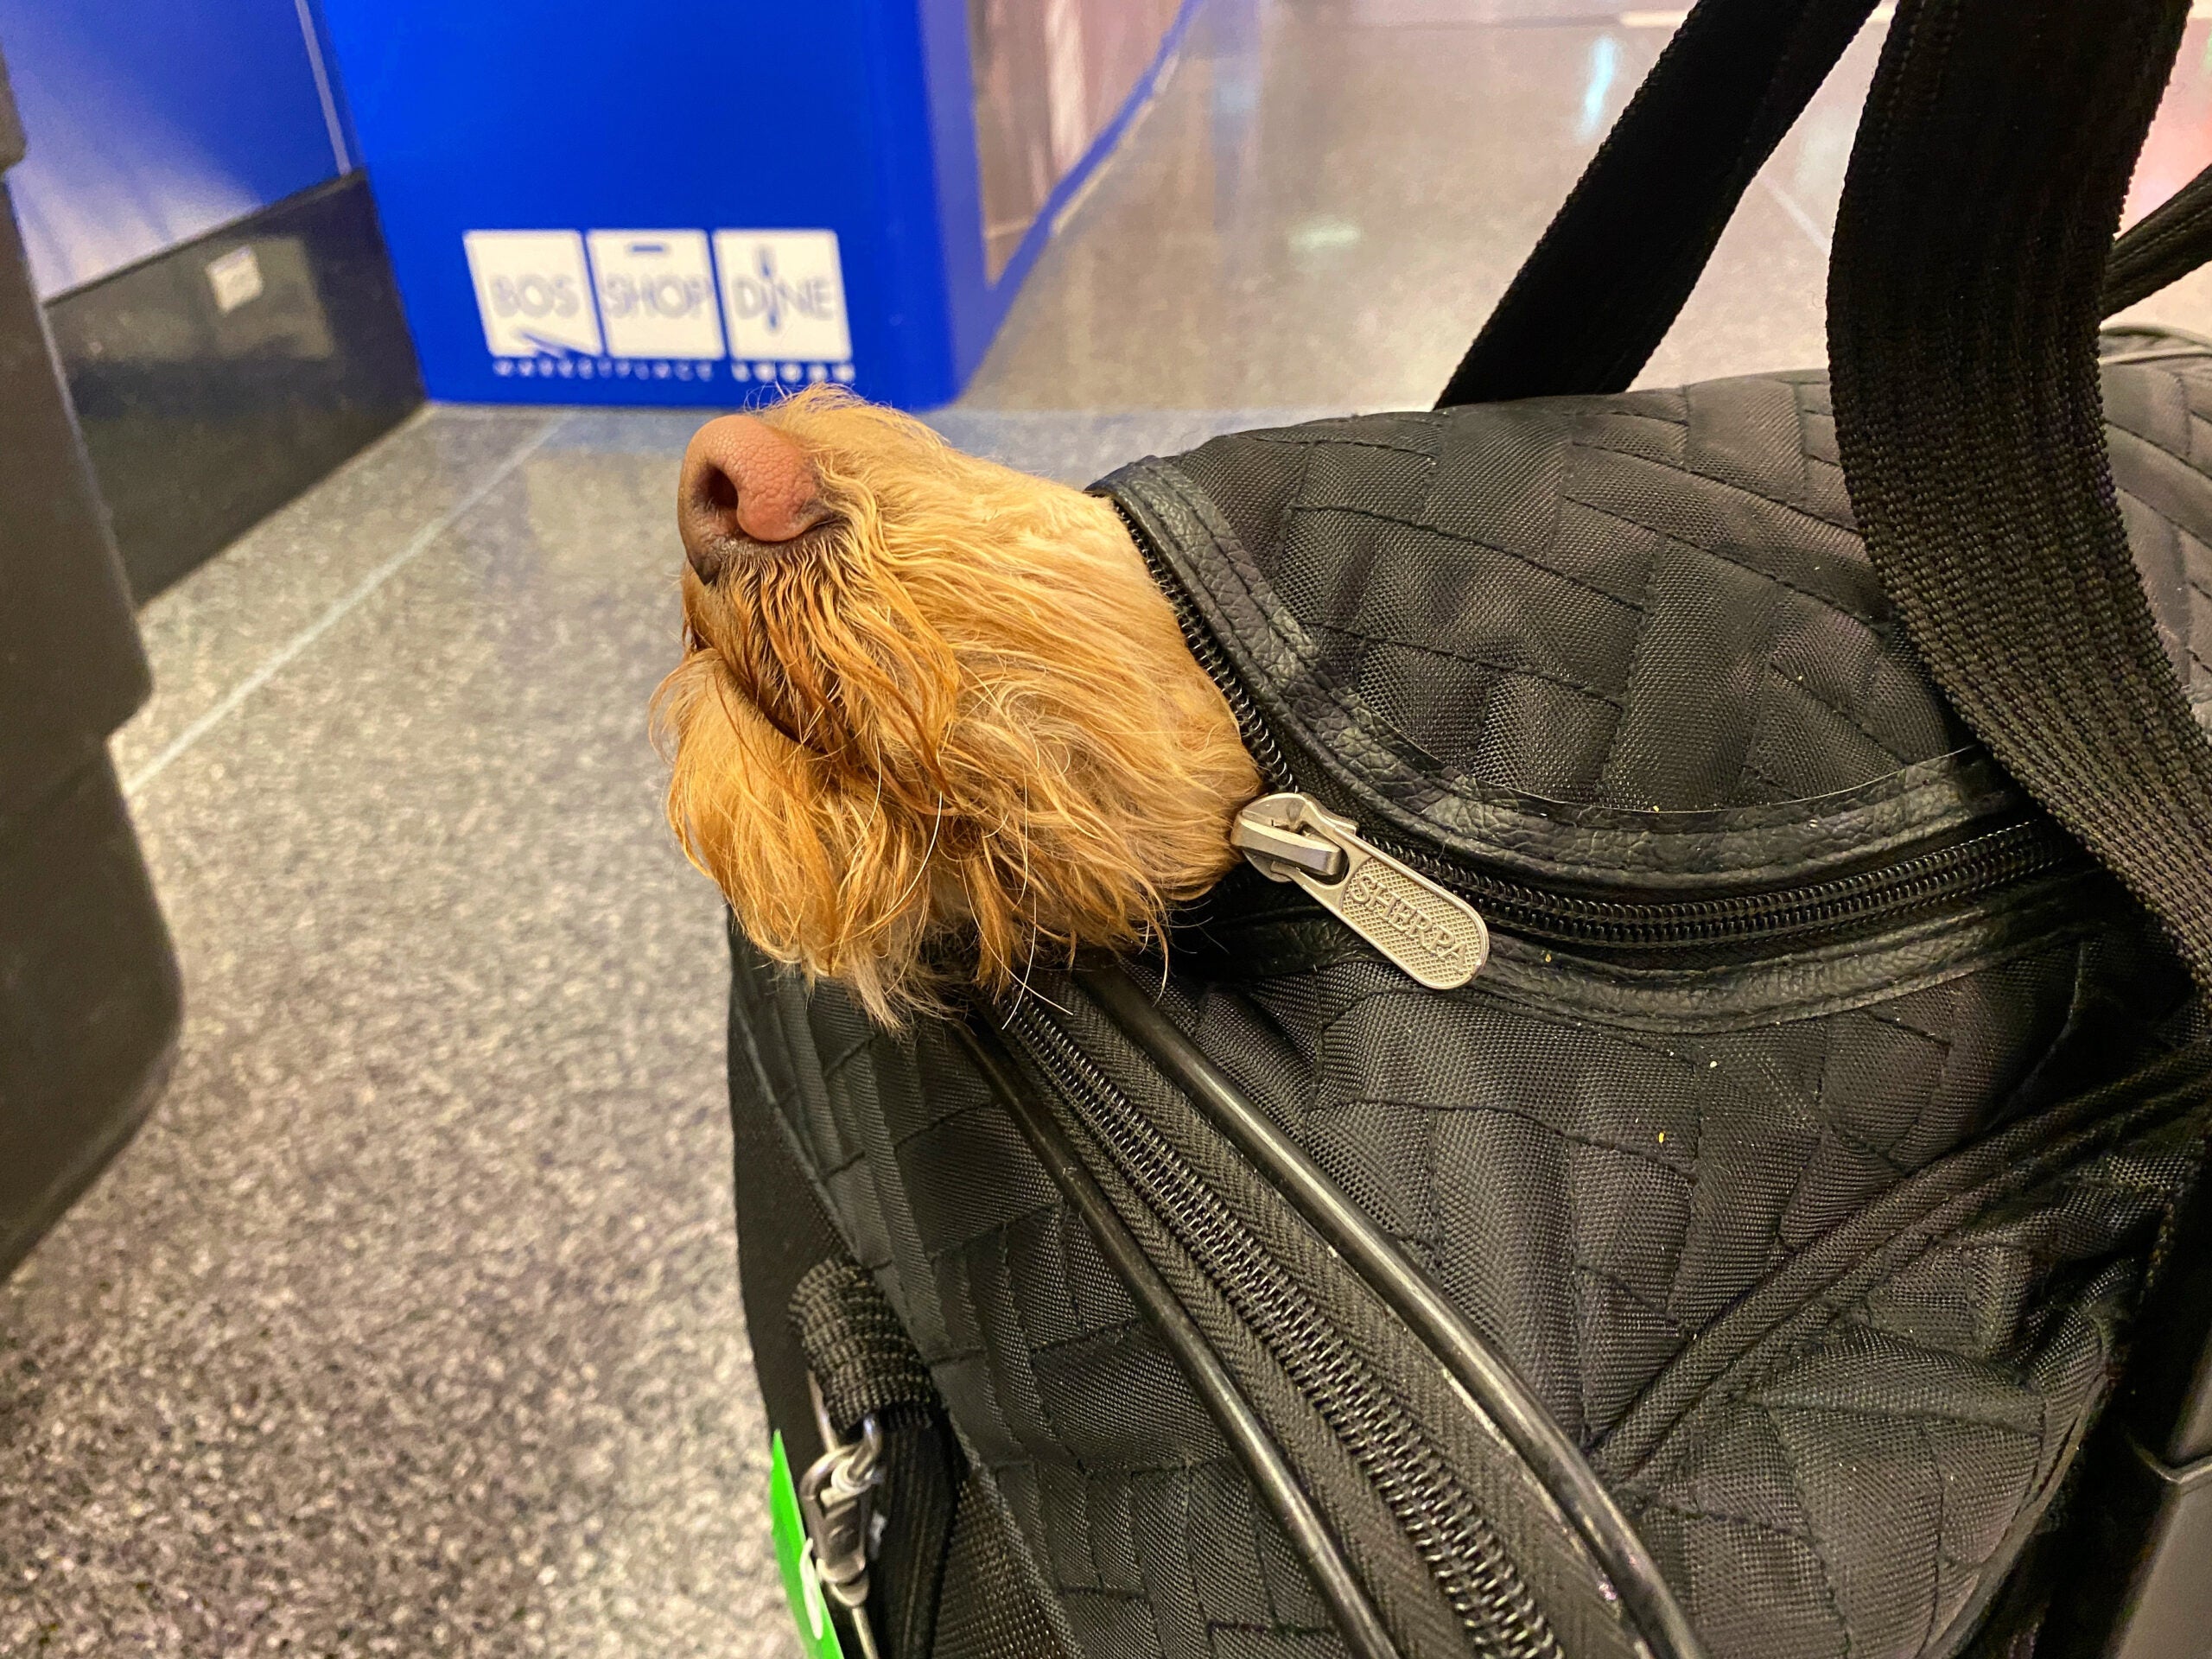 travel on plane with dog